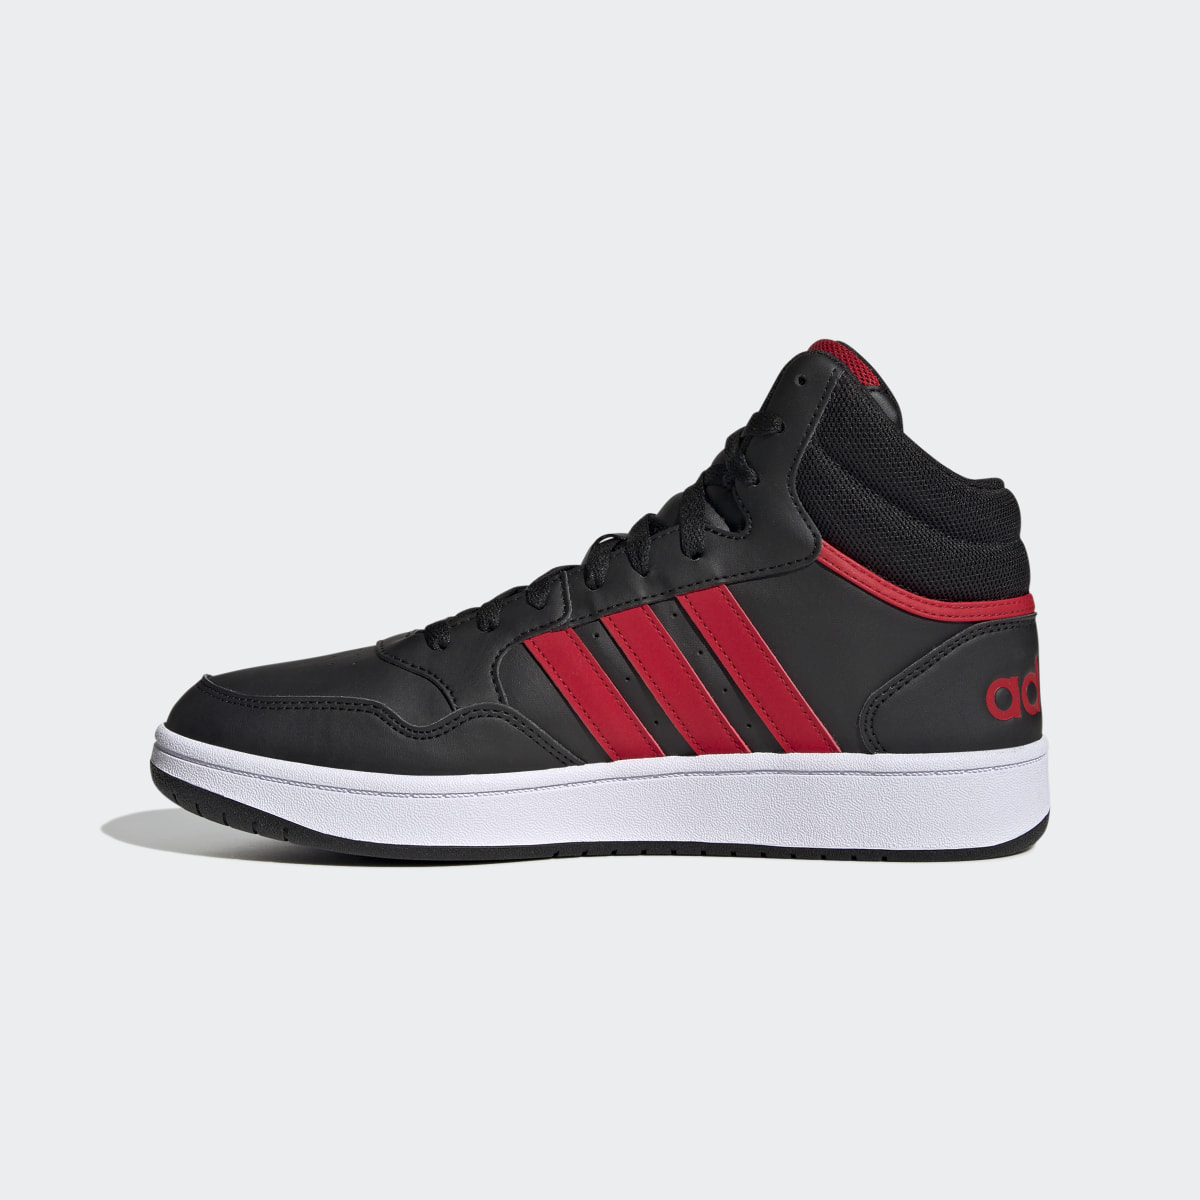 Adidas Hoops 3.0 Mid Lifestyle Basketball Classic Vintage Shoes. 7